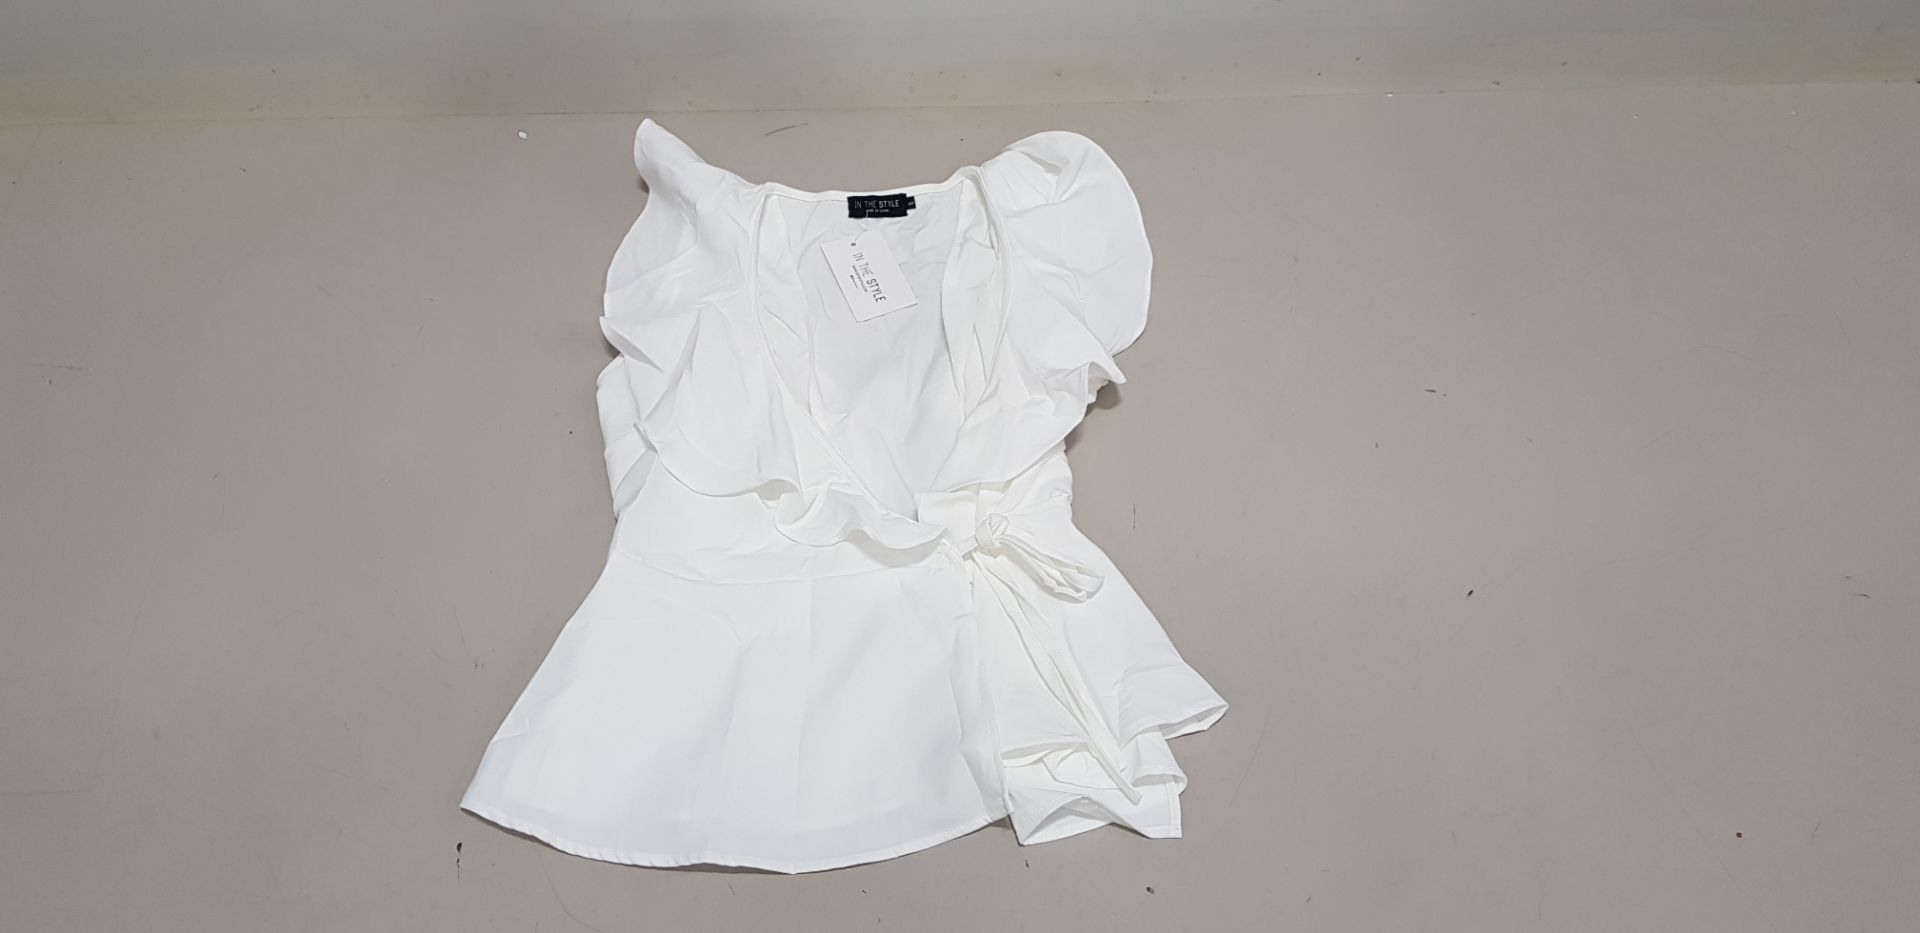 37 X BRAND NEW IN THE STYLE CURVE BILLIE FAIERS WHITE FRILL TOPS SIZE UK 8 AND 12